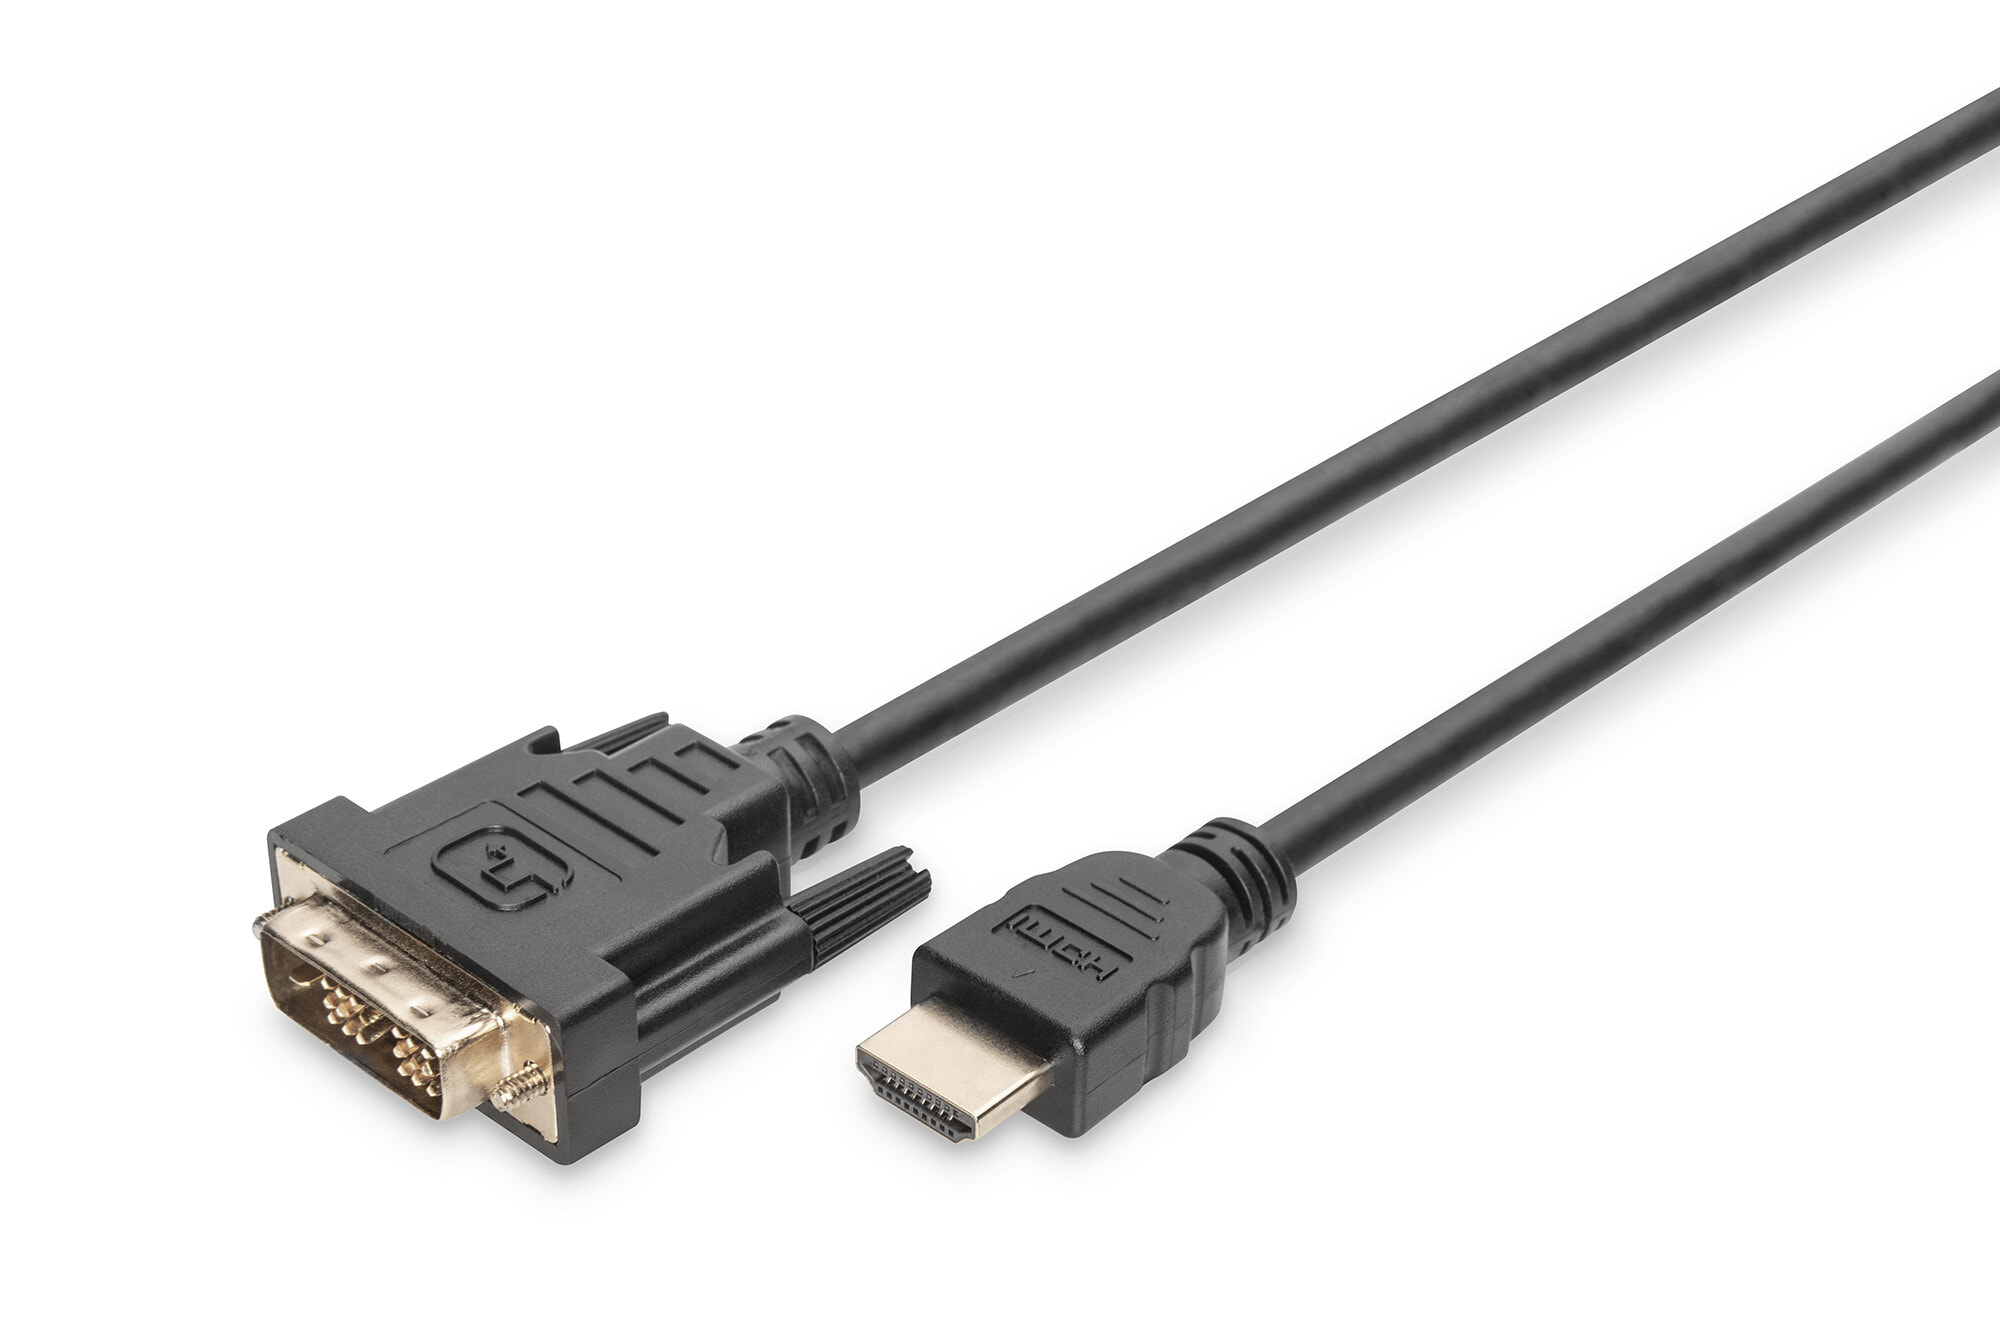 HDMI Adapter / Converter Cable, HDMI to DVI-D